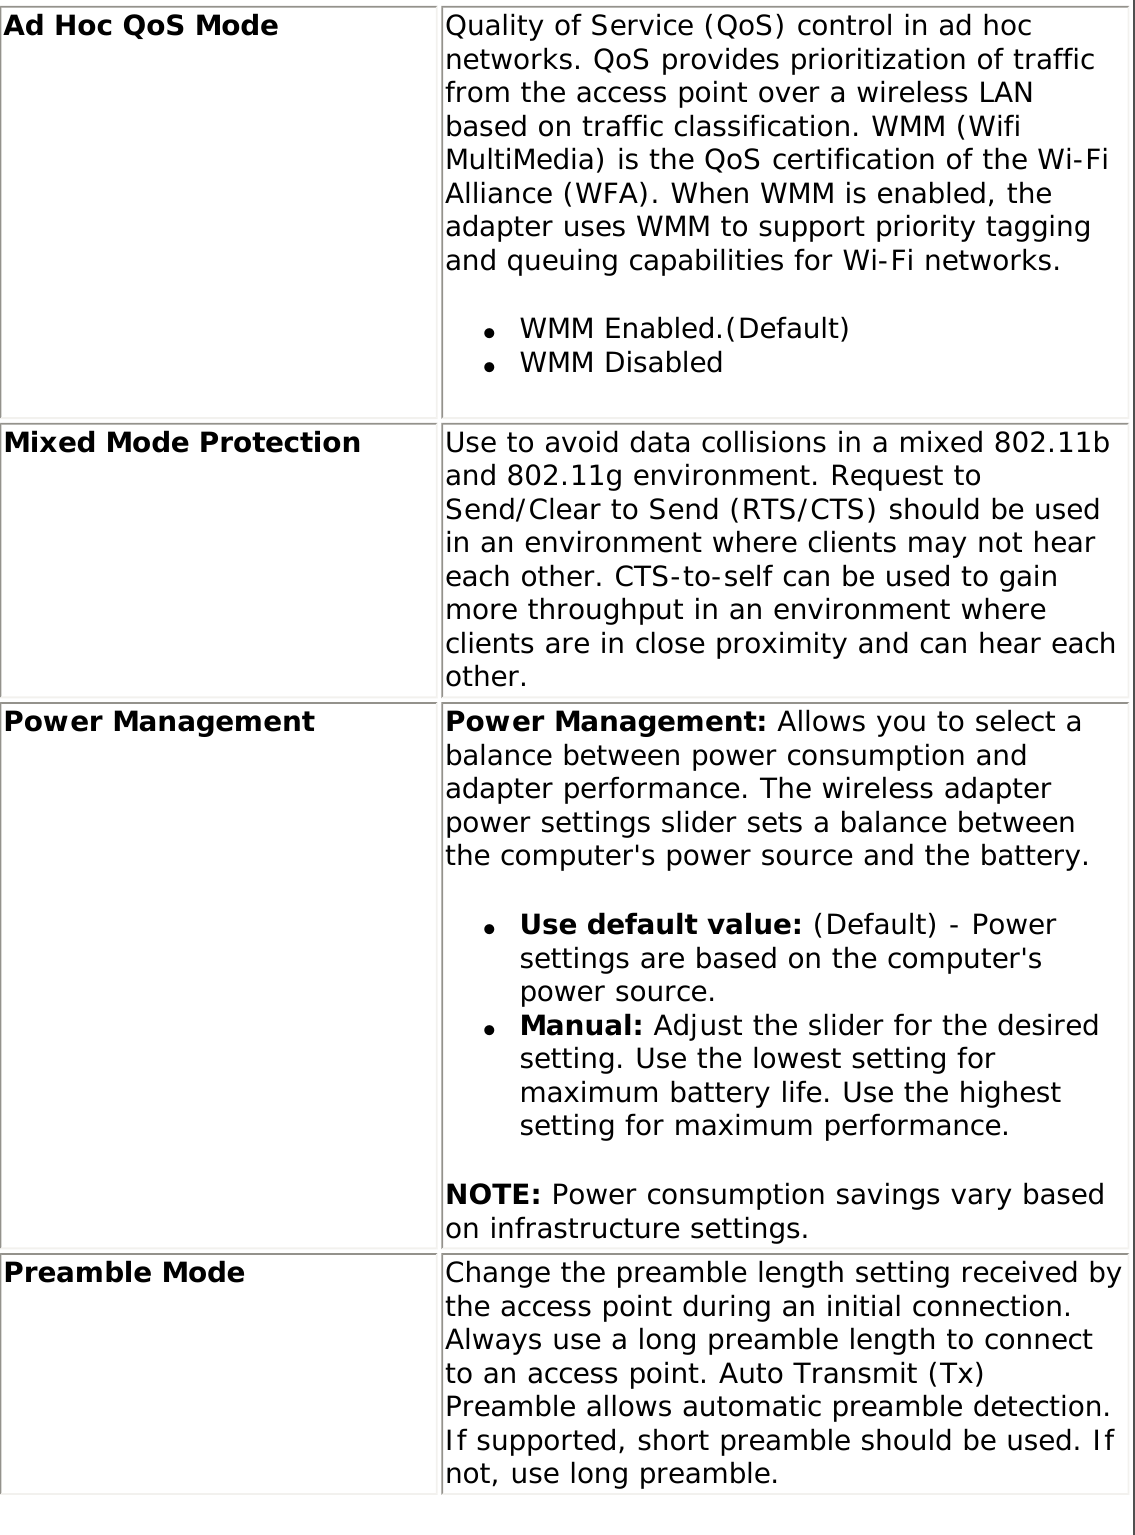 Ad Hoc QoS Mode Quality of Service (QoS) control in ad hoc networks. QoS provides prioritization of traffic from the access point over a wireless LAN based on traffic classification. WMM (Wifi MultiMedia) is the QoS certification of the Wi-Fi Alliance (WFA). When WMM is enabled, the adapter uses WMM to support priority tagging and queuing capabilities for Wi-Fi networks.●     WMM Enabled.(Default)●     WMM DisabledMixed Mode Protection Use to avoid data collisions in a mixed 802.11b and 802.11g environment. Request to Send/Clear to Send (RTS/CTS) should be used in an environment where clients may not hear each other. CTS-to-self can be used to gain more throughput in an environment where clients are in close proximity and can hear each other. Power Management Power Management: Allows you to select a balance between power consumption and adapter performance. The wireless adapter power settings slider sets a balance between the computer&apos;s power source and the battery. ●     Use default value: (Default) - Power settings are based on the computer&apos;s power source.●     Manual: Adjust the slider for the desired setting. Use the lowest setting for maximum battery life. Use the highest setting for maximum performance. NOTE: Power consumption savings vary based on infrastructure settings.Preamble Mode  Change the preamble length setting received by the access point during an initial connection. Always use a long preamble length to connect to an access point. Auto Transmit (Tx) Preamble allows automatic preamble detection. If supported, short preamble should be used. If not, use long preamble.